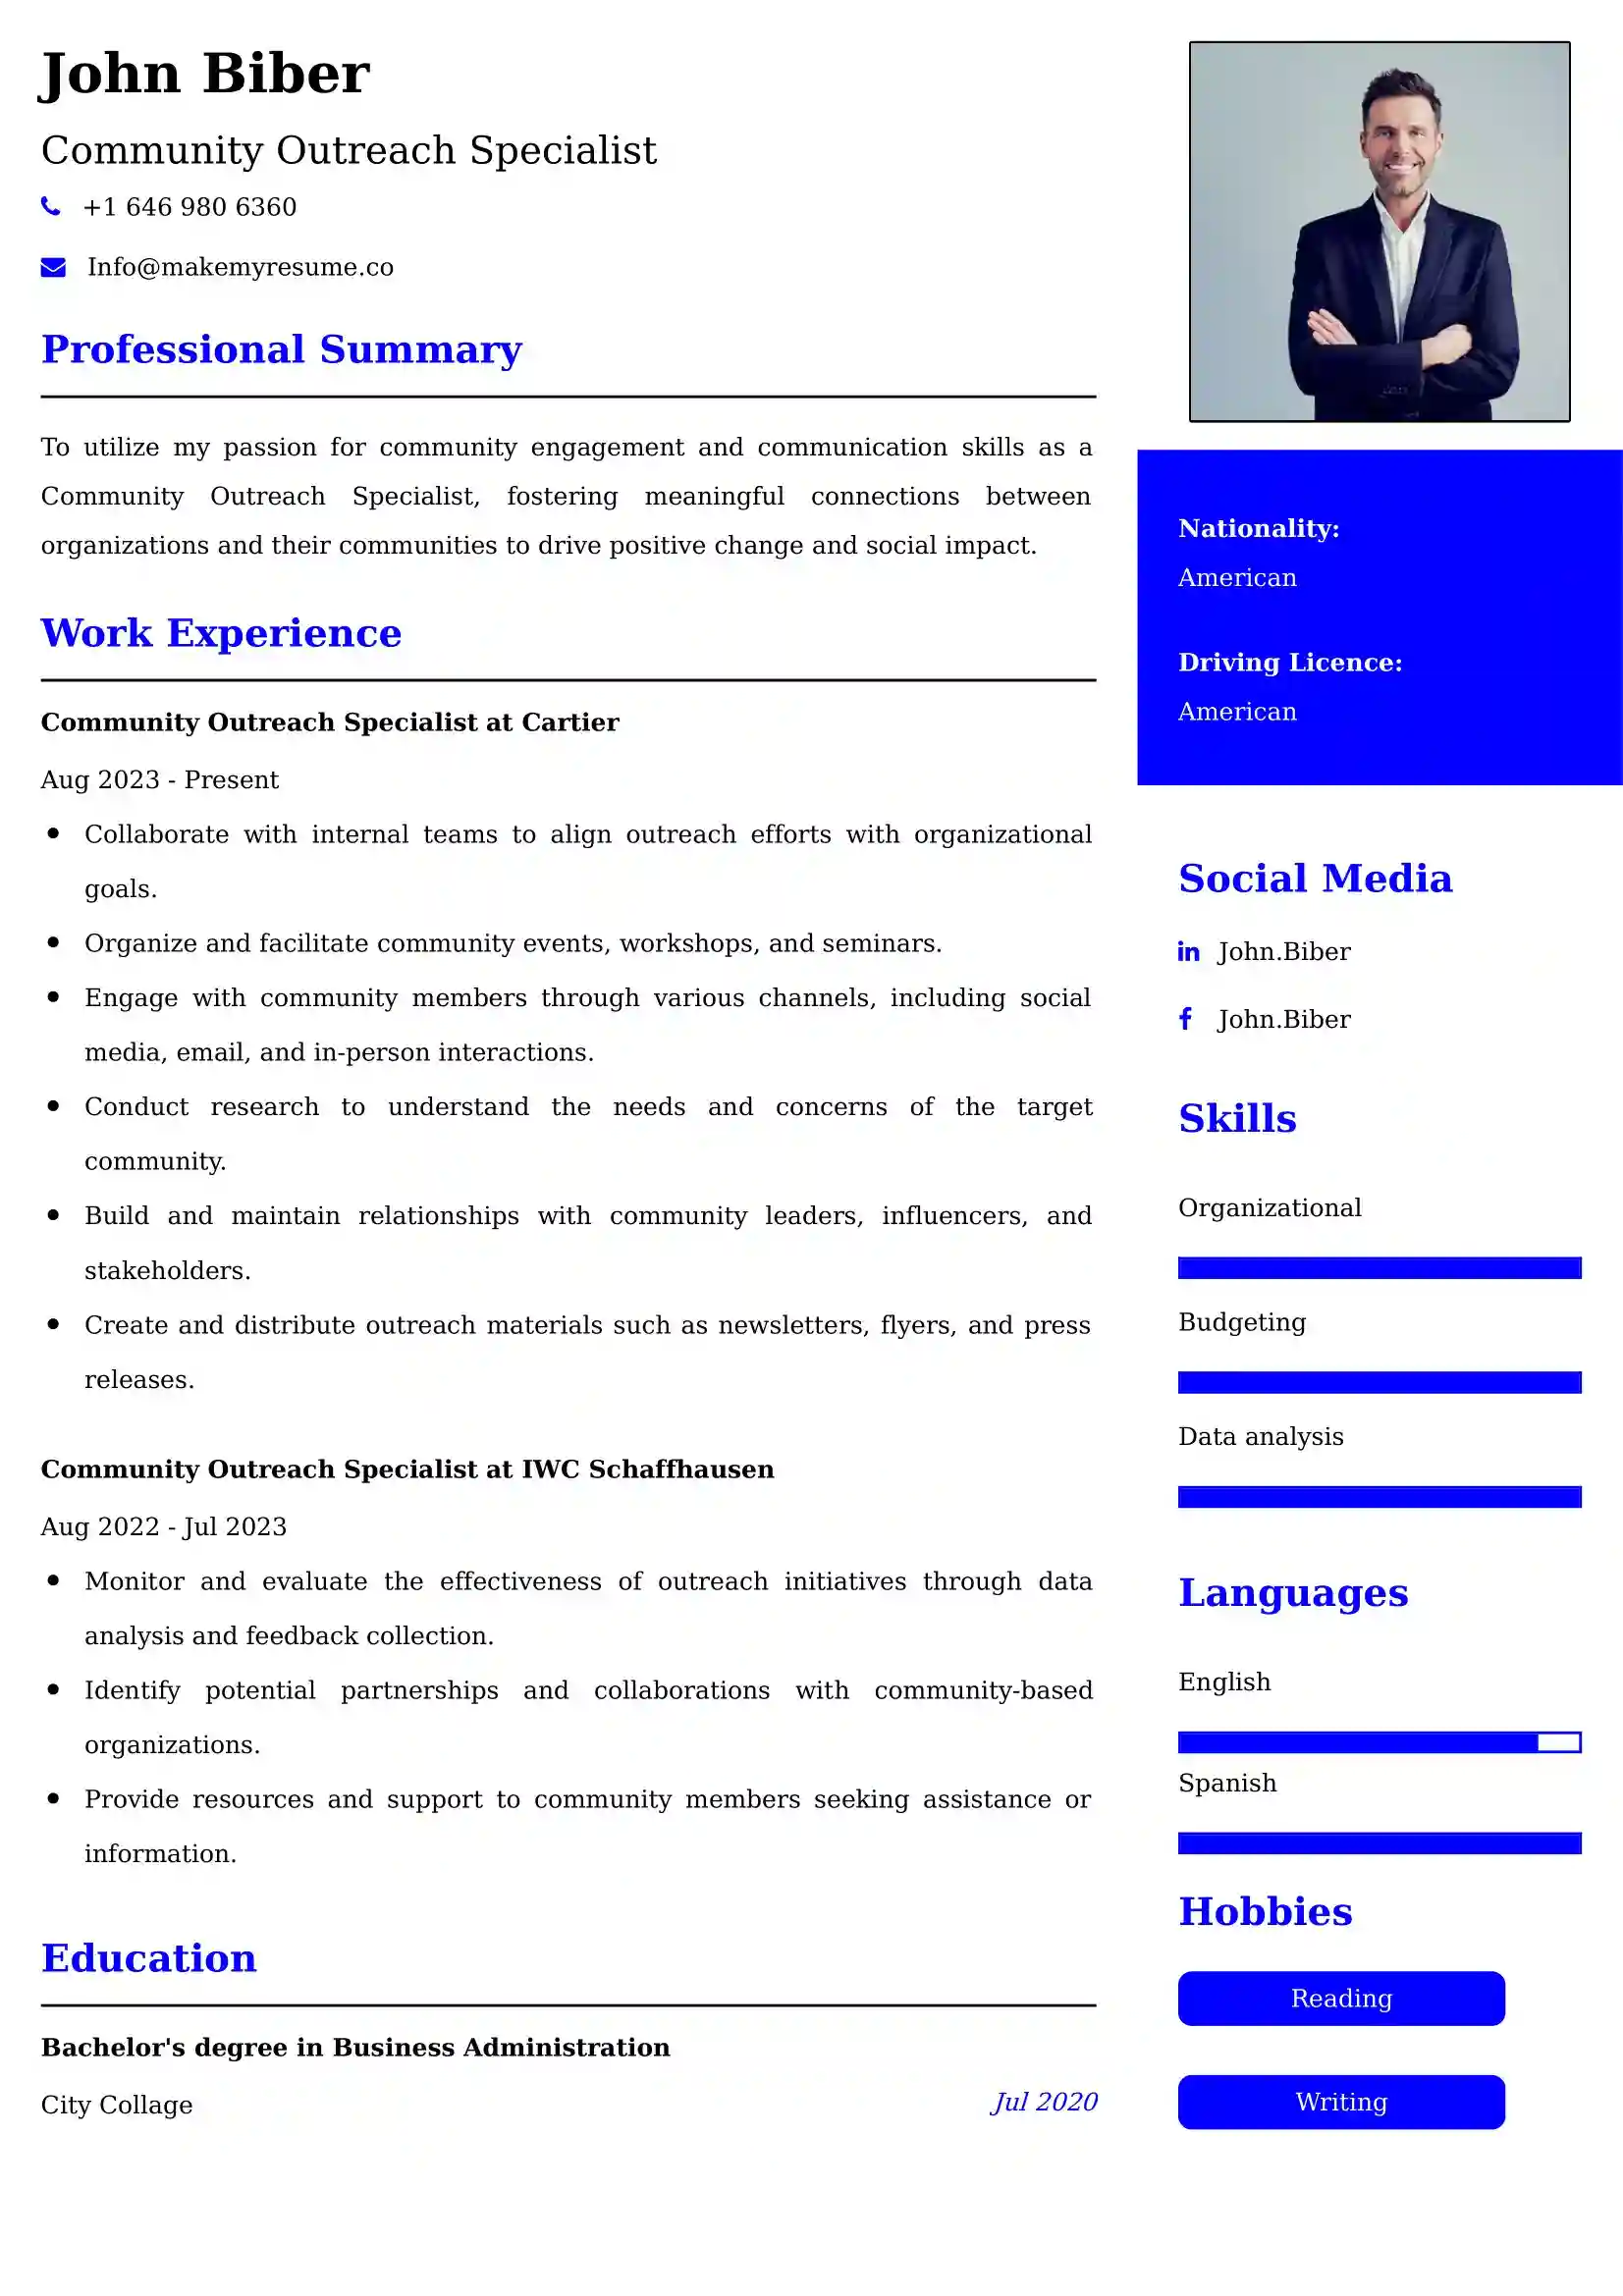 Community Outreach Specialist Resume Examples - UK Format, Latest Template.